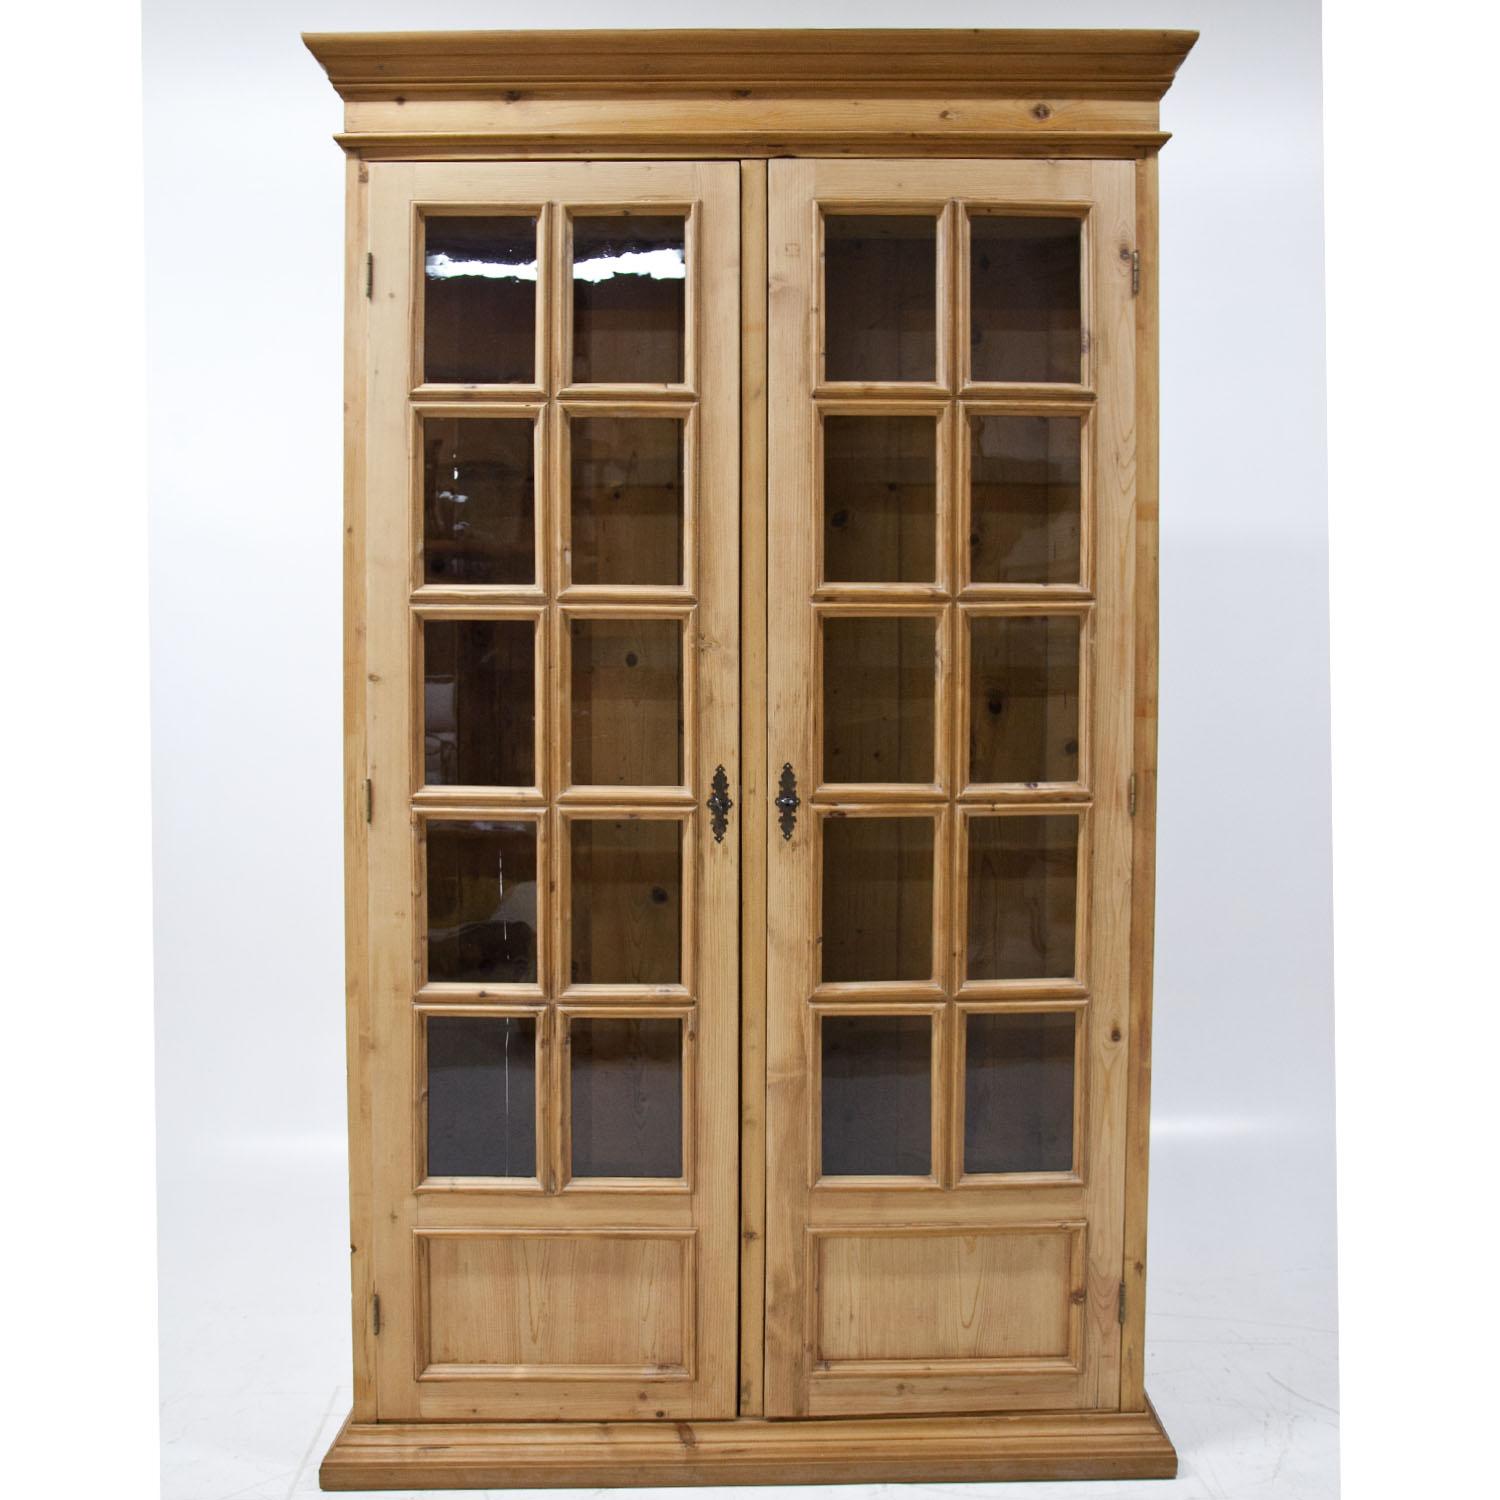 Pair of large Provincial bookcases with slightly protruding bases and cornices as well as glazed doors. The strutting of the doors was redone circa 1970s.